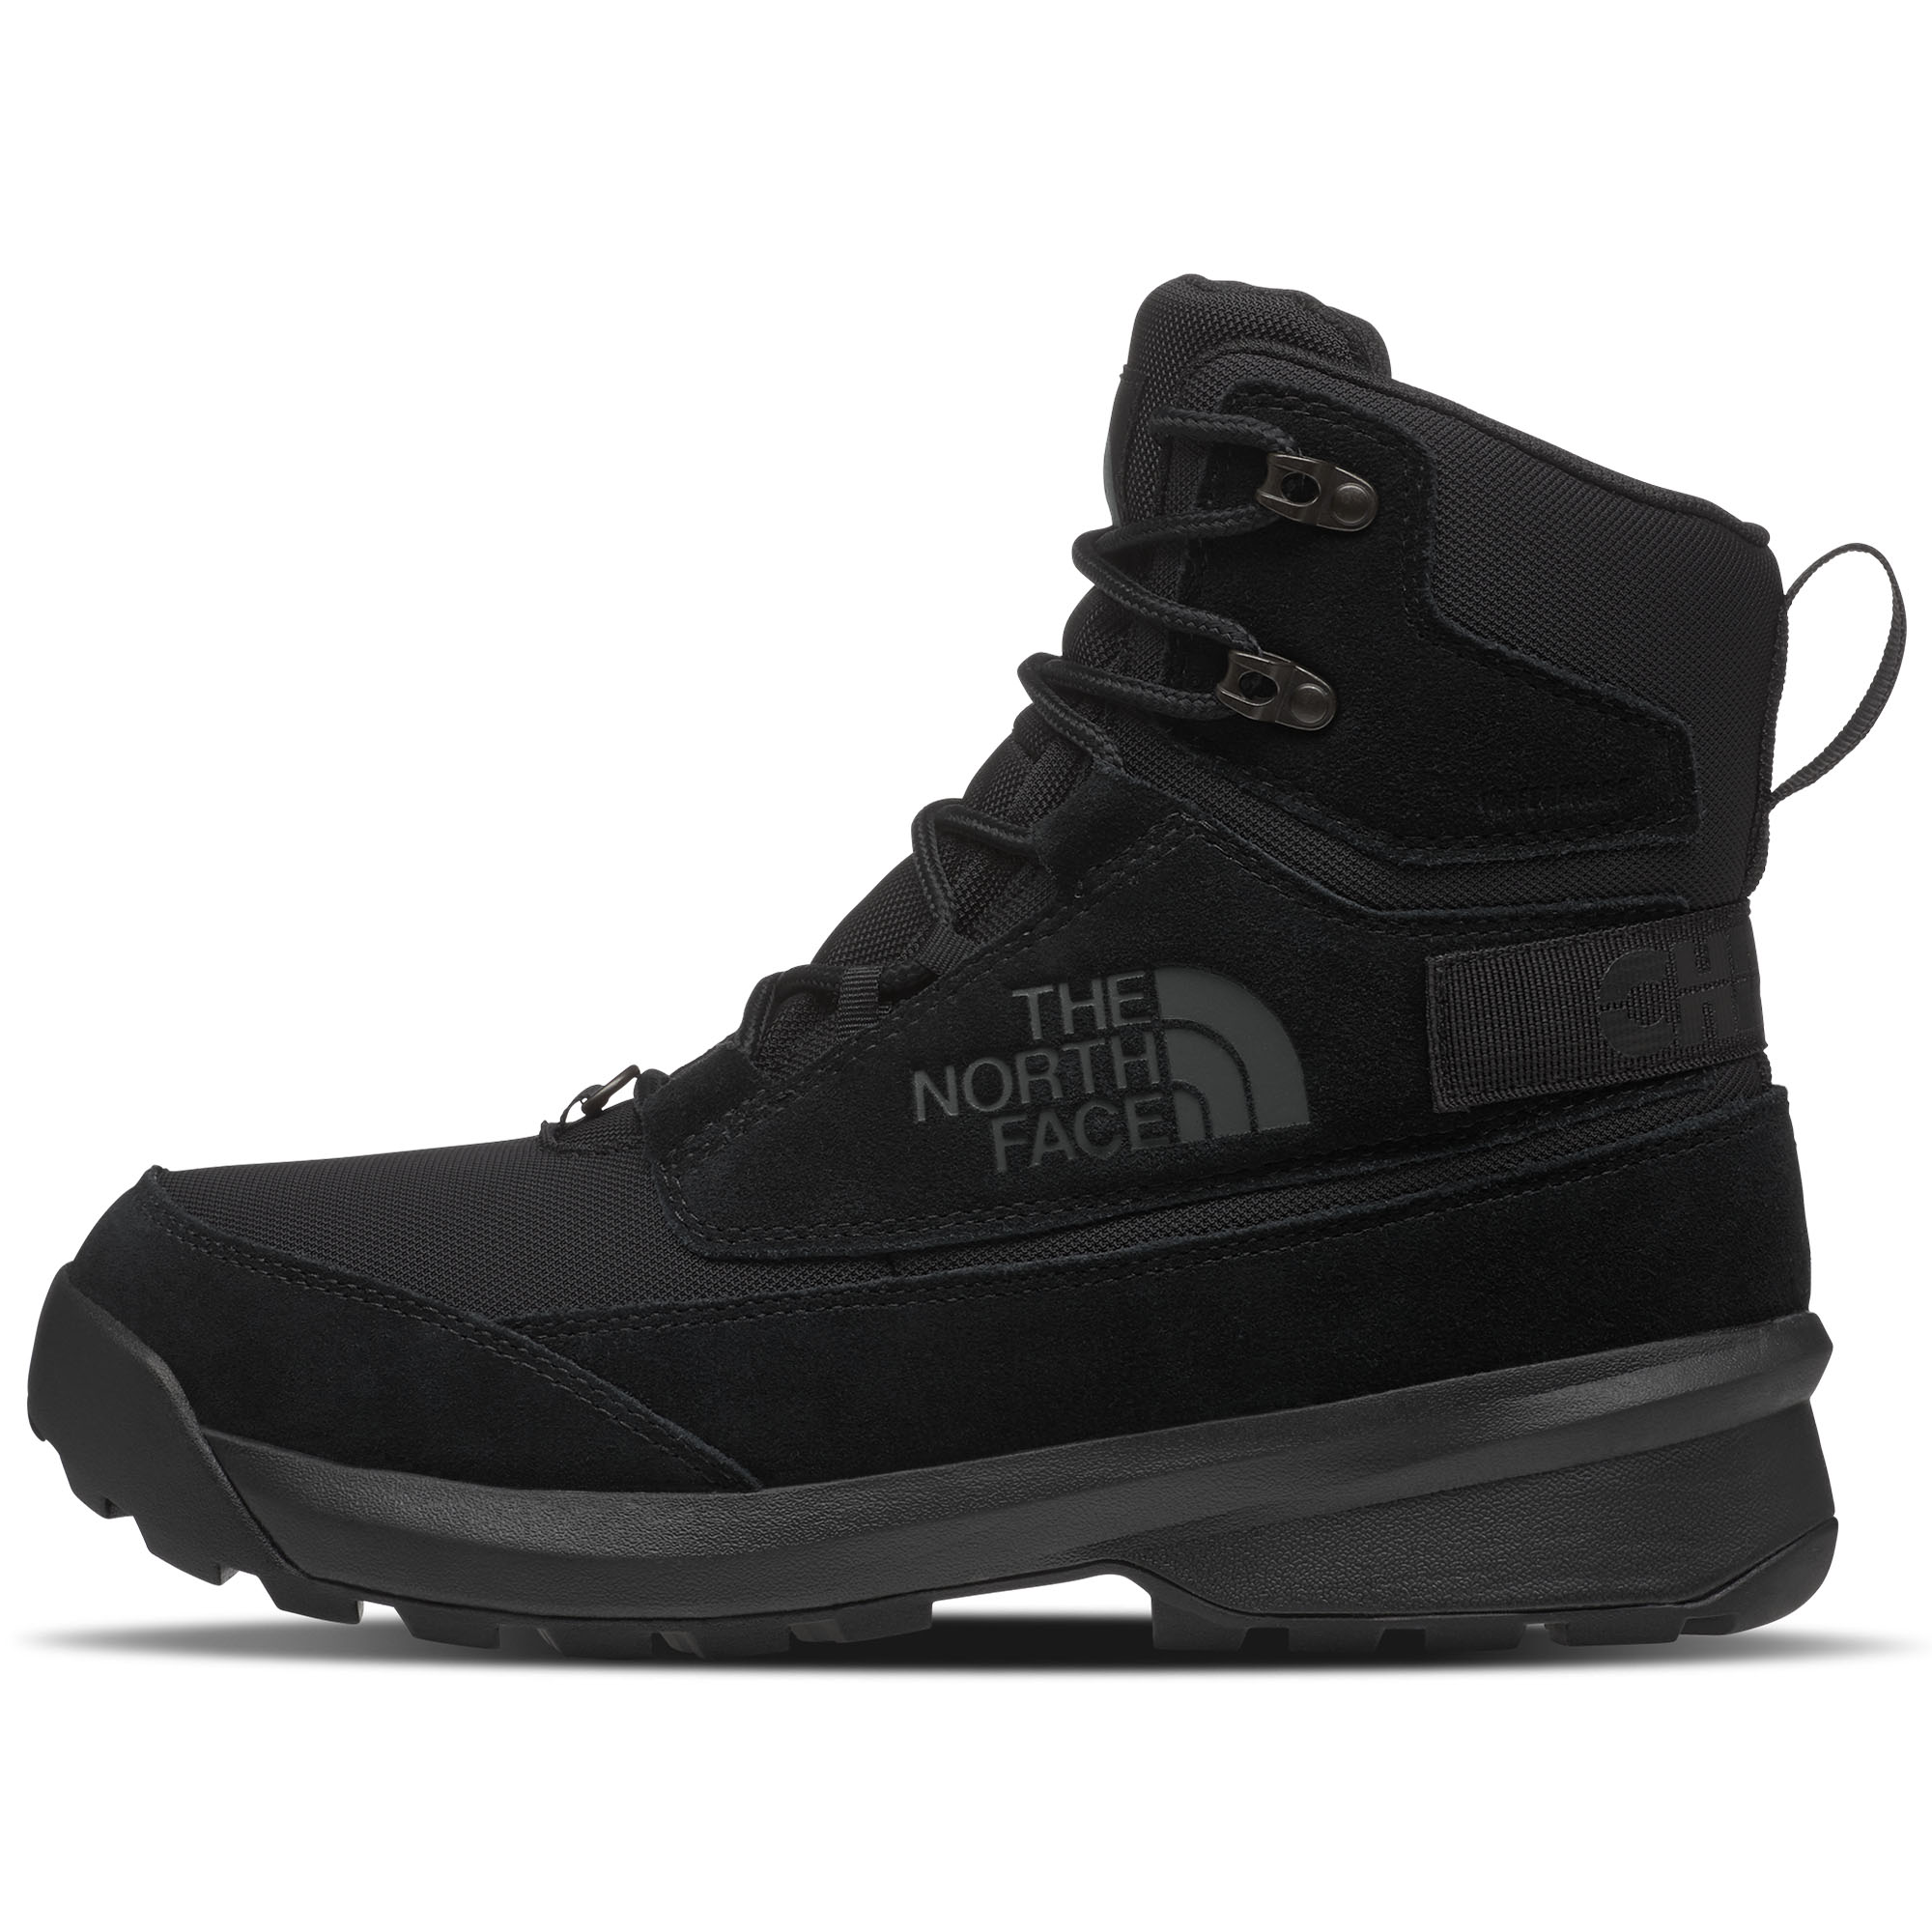 The North Face Men's Chilkat V Cognito Waterproof Boots -  00196247376647